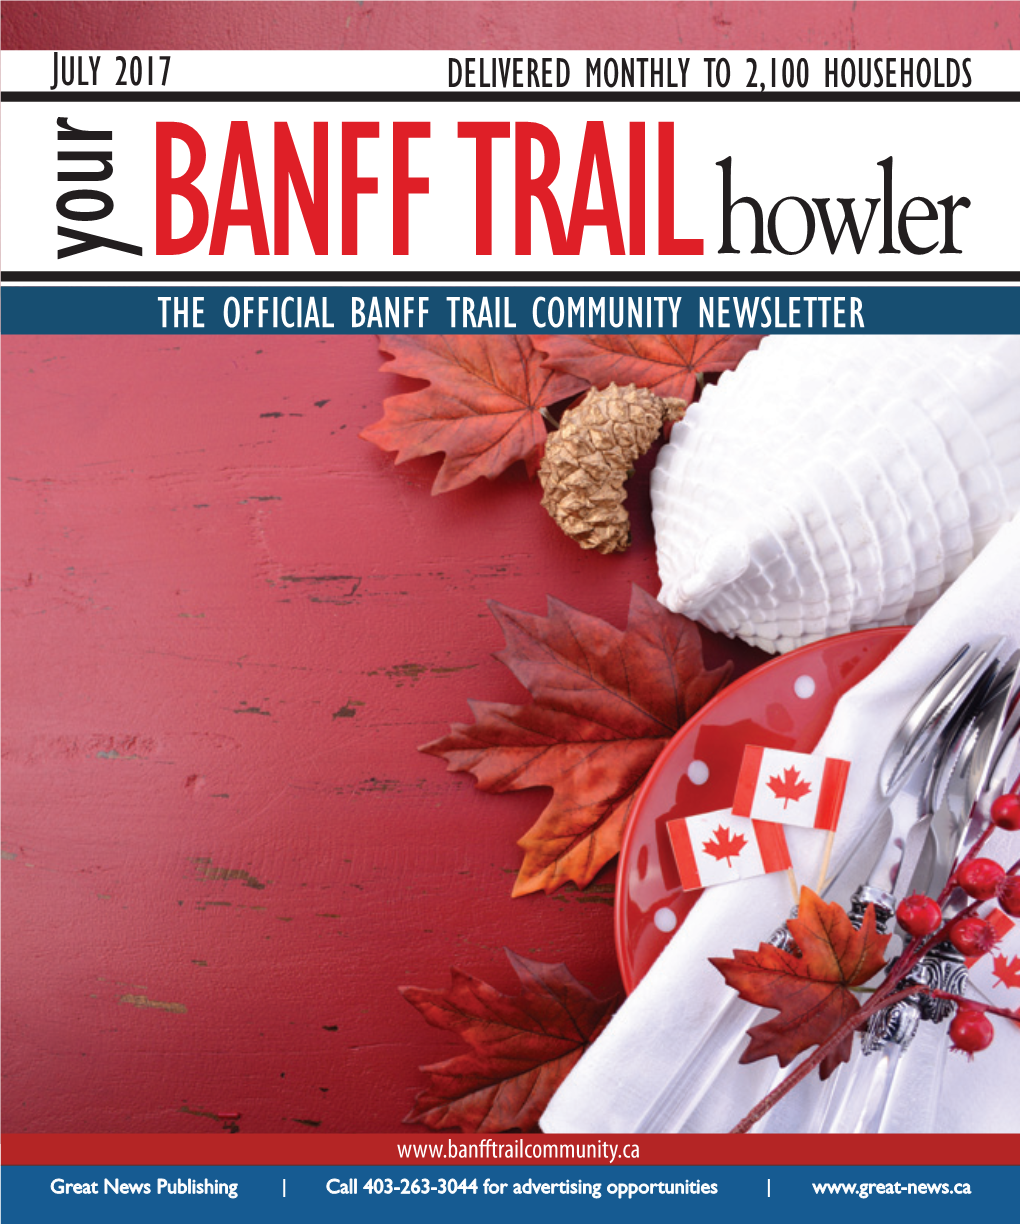 BANFF Trailhowler the OFFICIAL BANFF TRAIL COMMUNITY NEWSLETTER